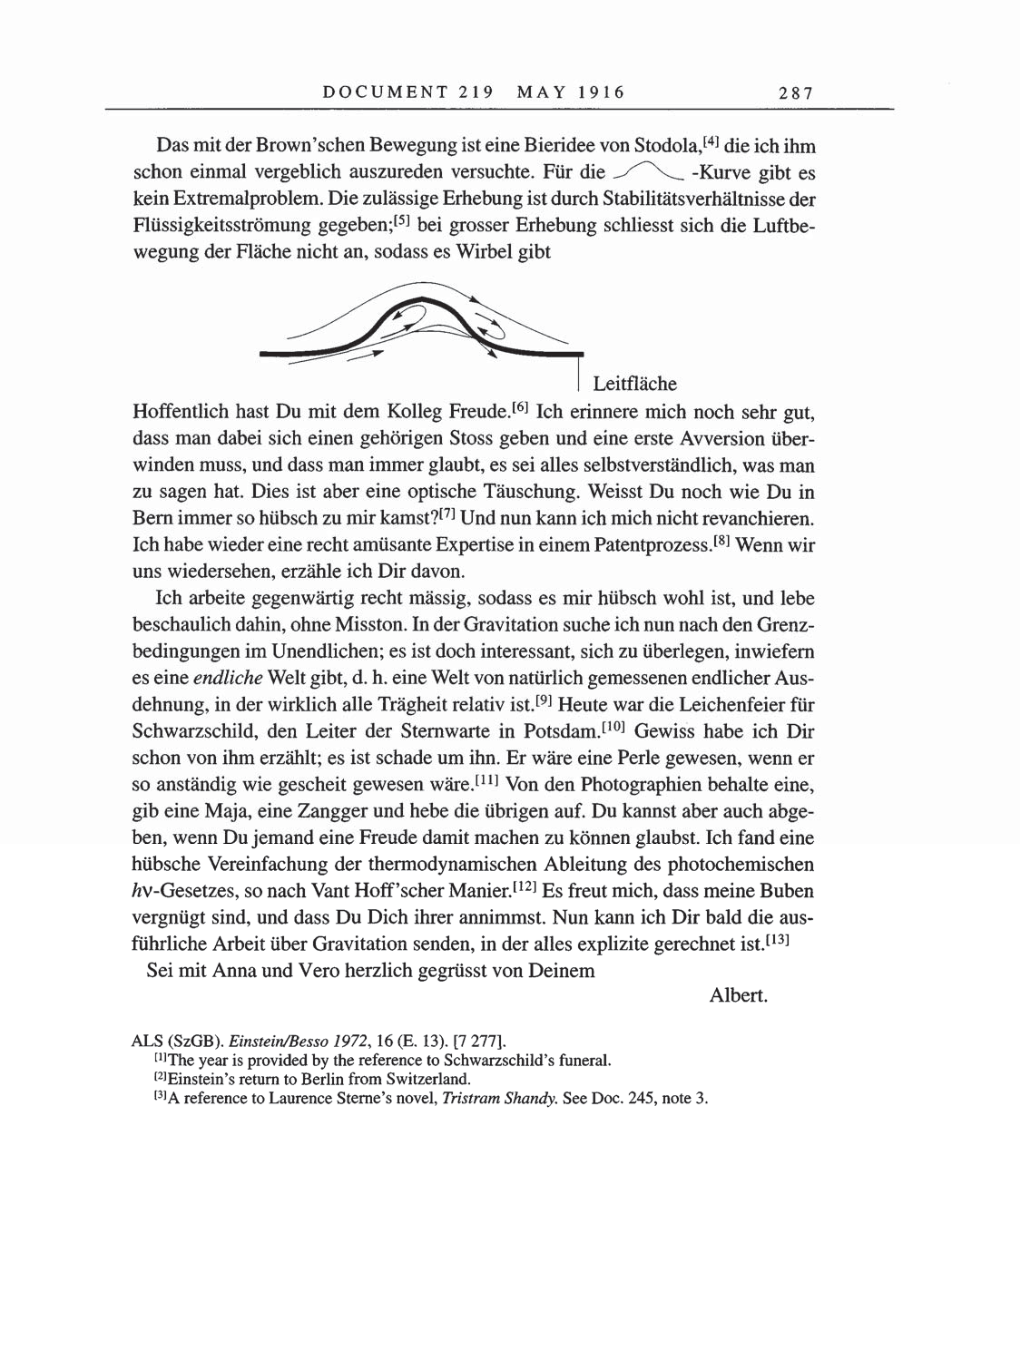 Volume 8, Part A: The Berlin Years: Correspondence 1914-1917 page 287